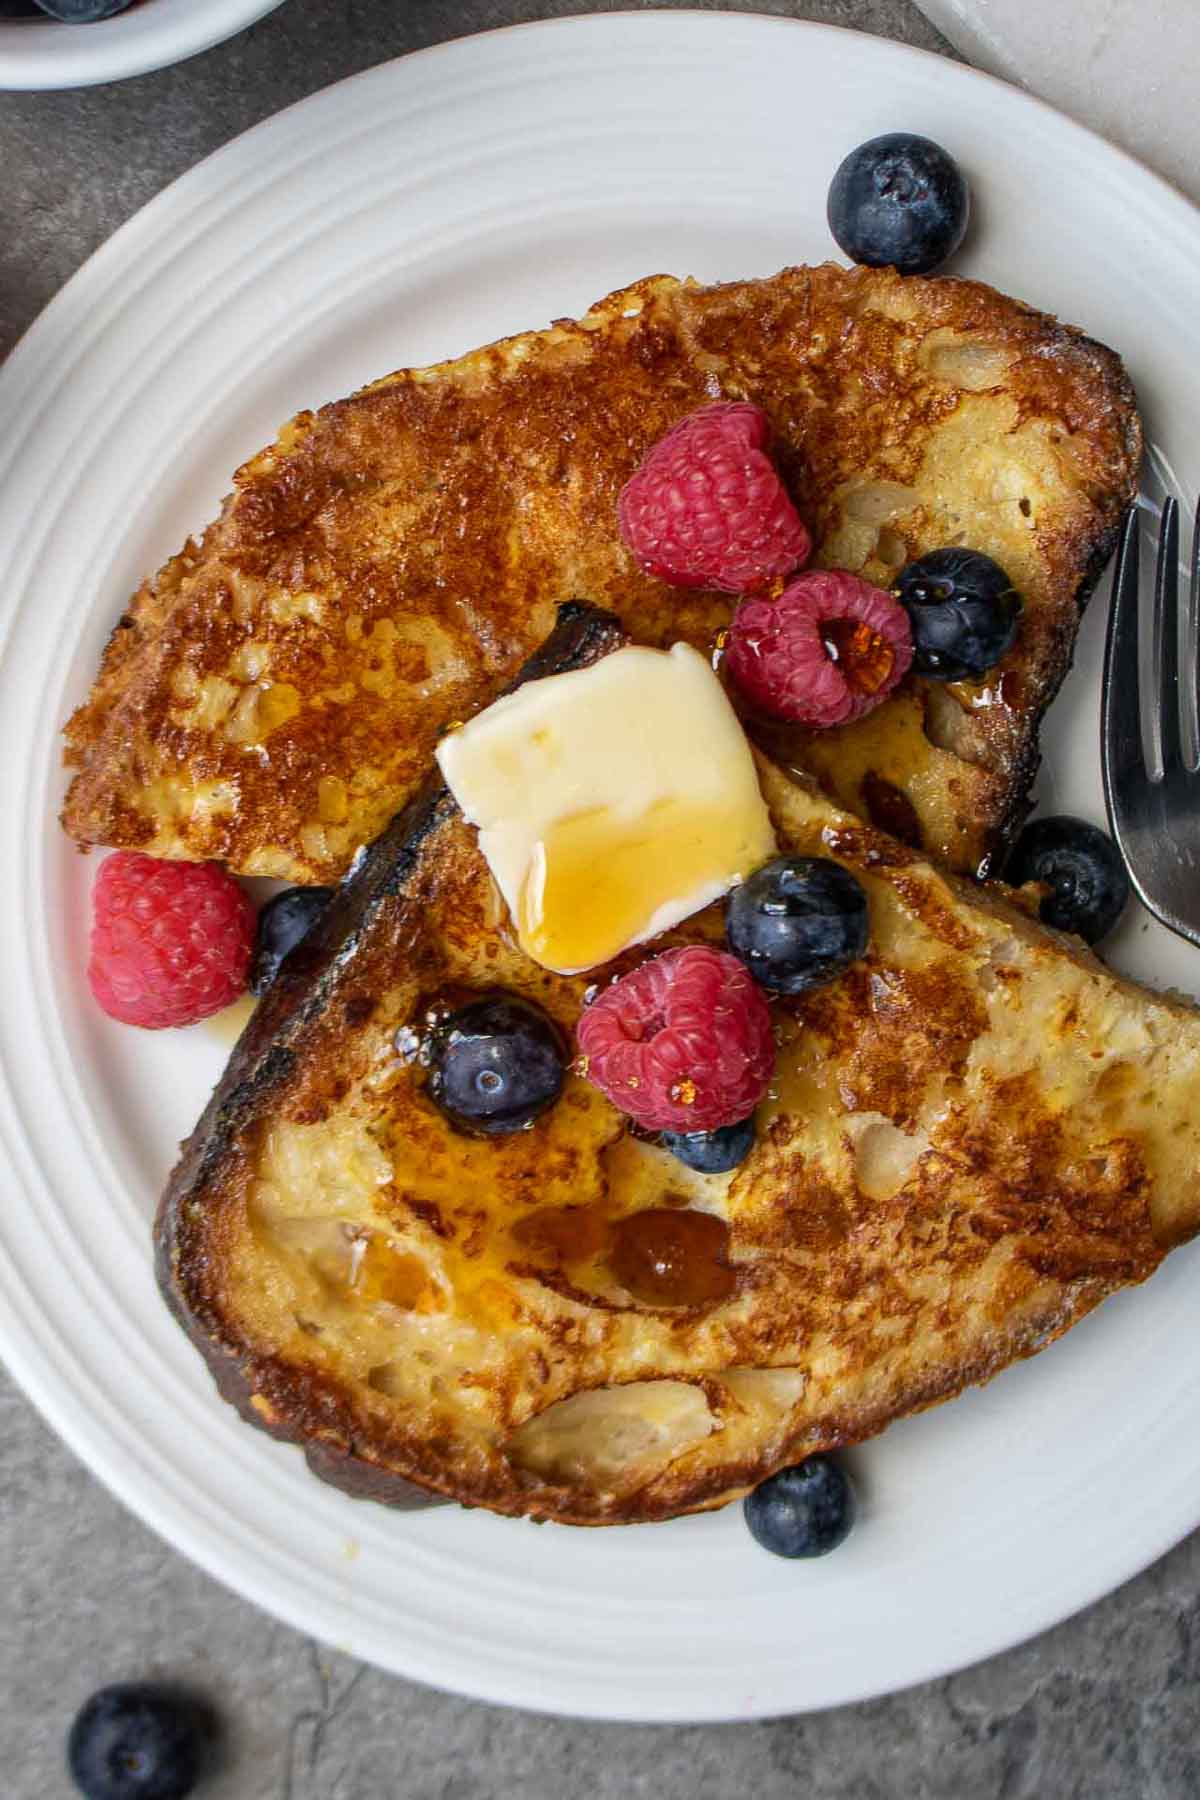 Close up images of slices of sourdough bread French toast with butter, berries, and syrup